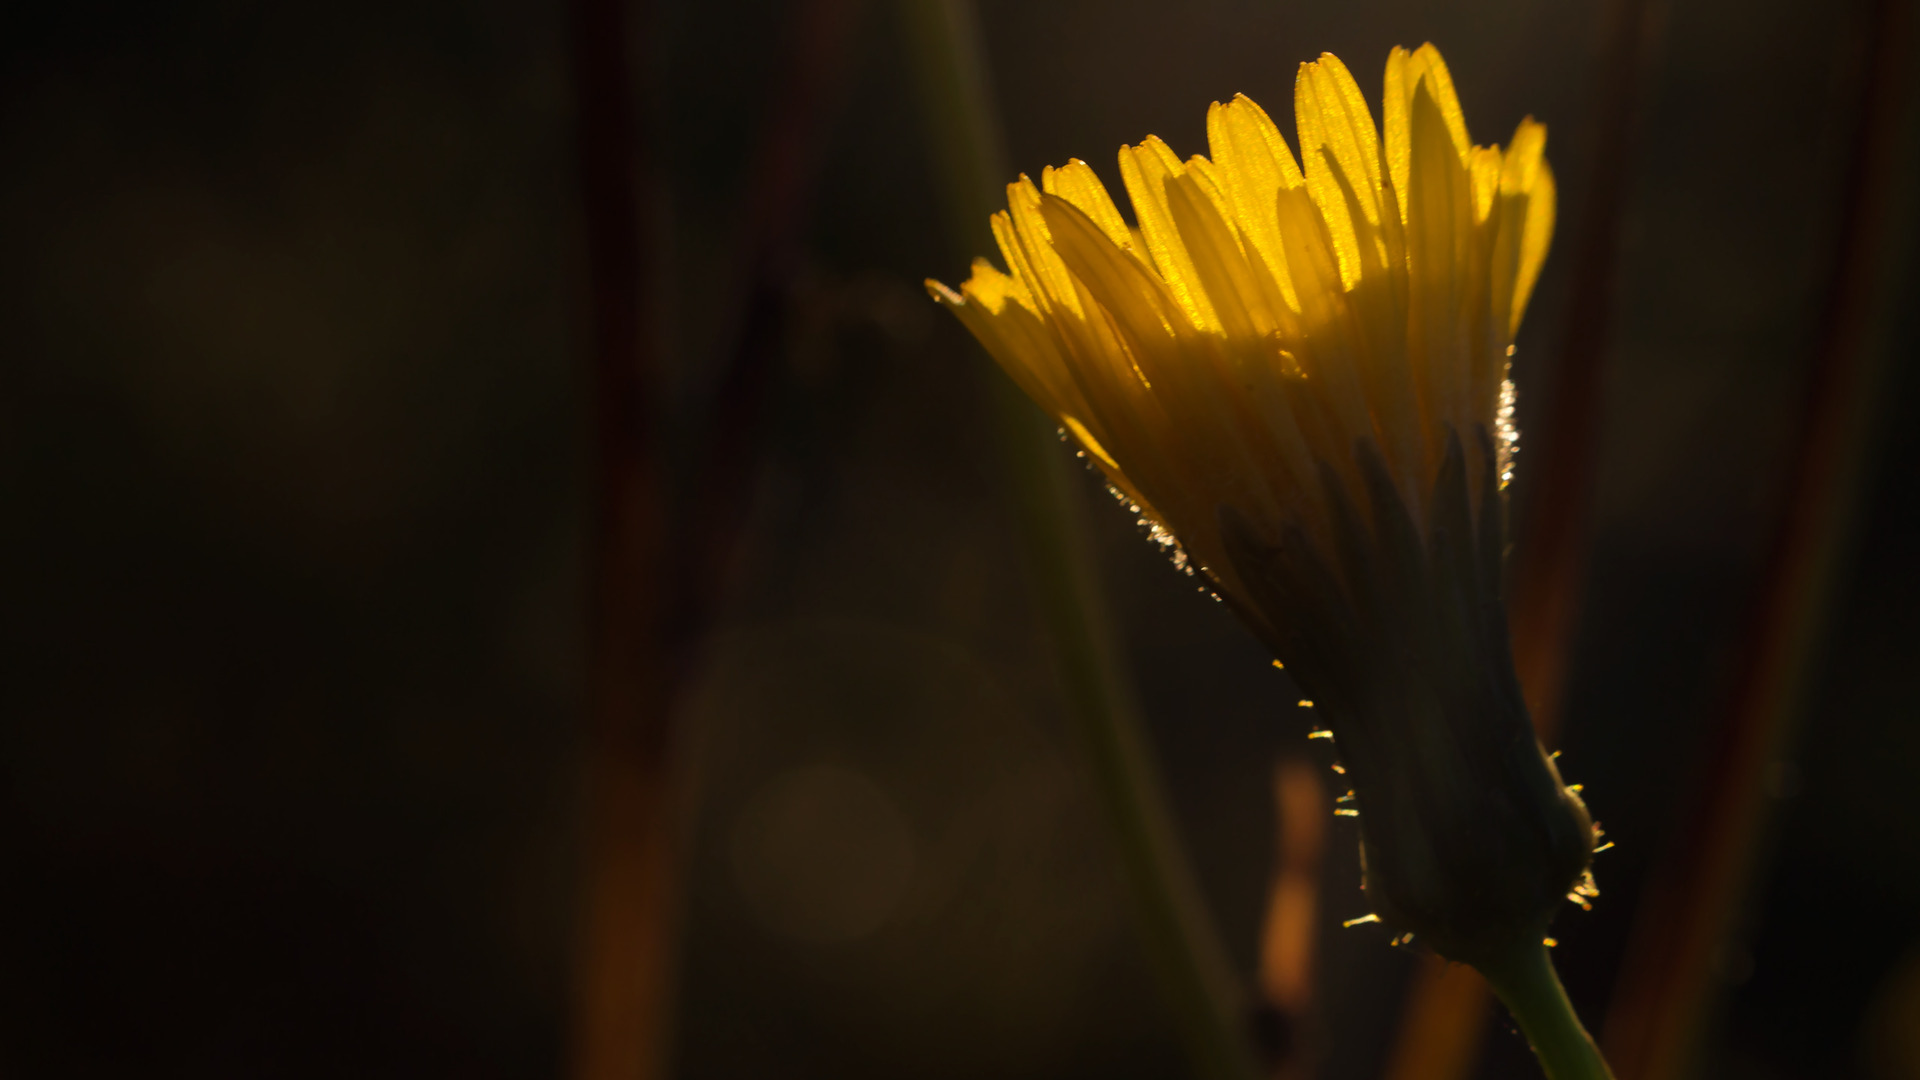 Dandelion flower half closed bud and sunlight in the darkness